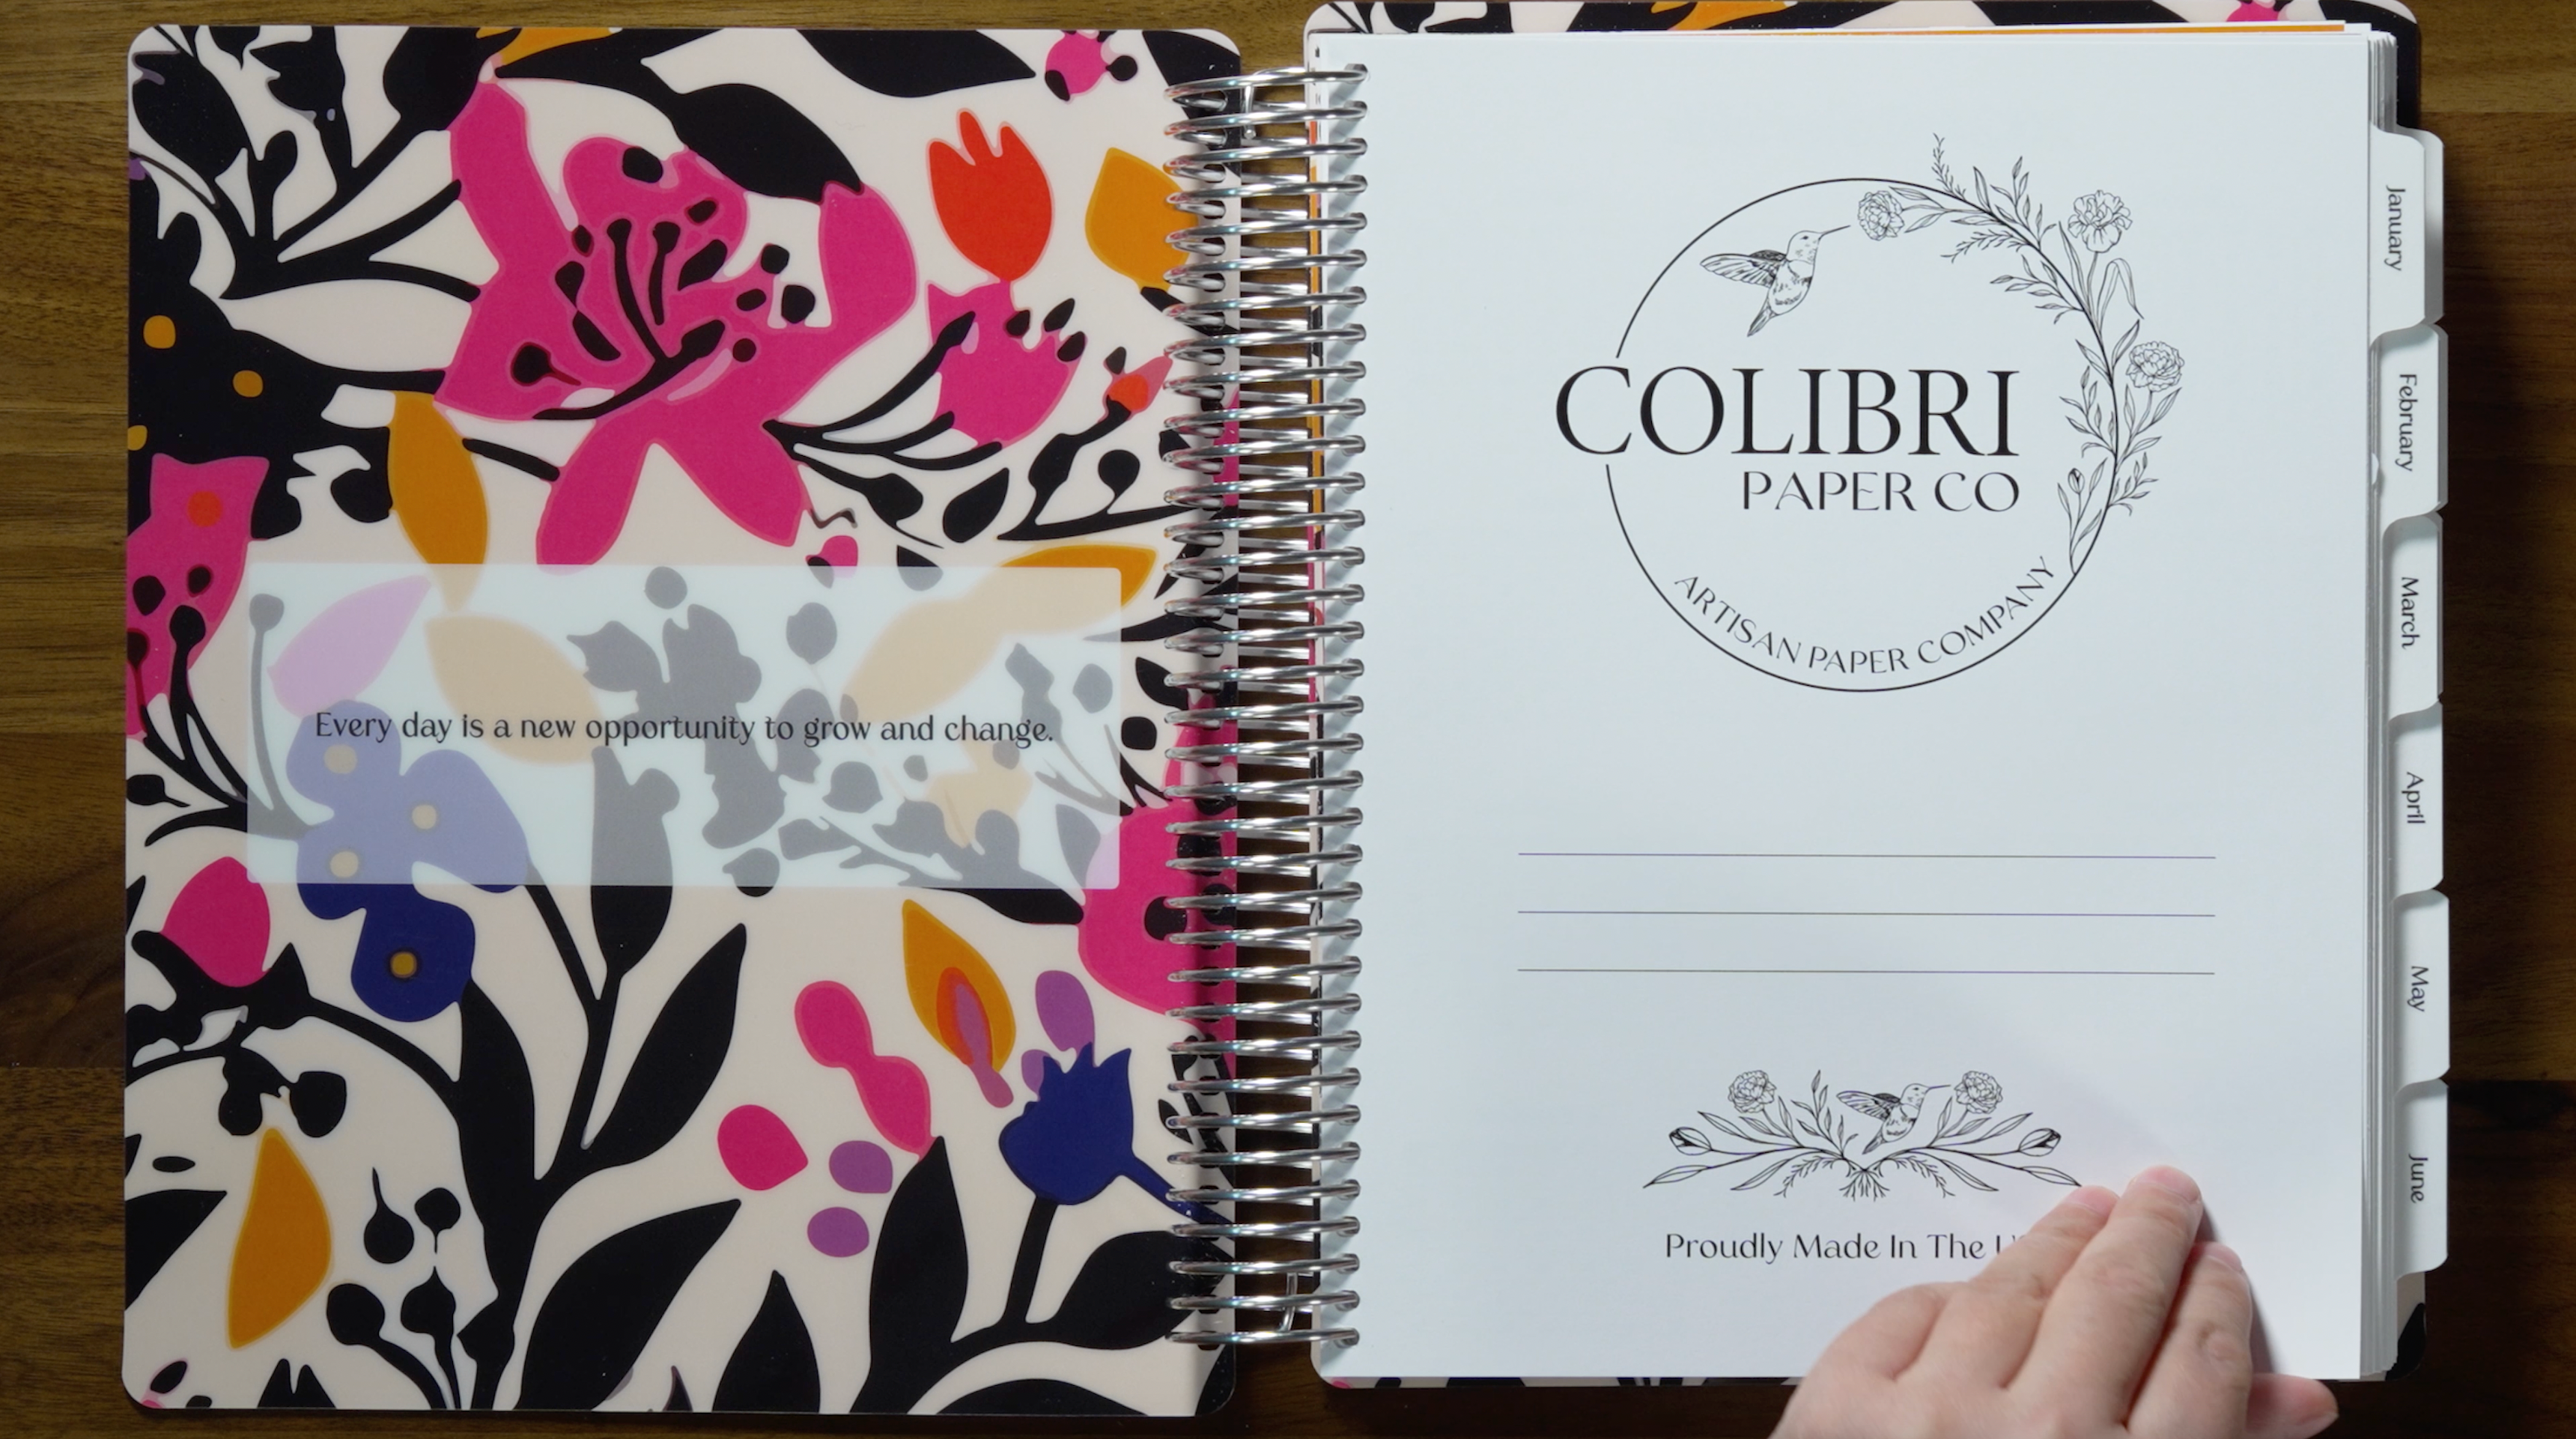 Load video: A walkthrough of the Works Daily Planner by Colibri Paper Co